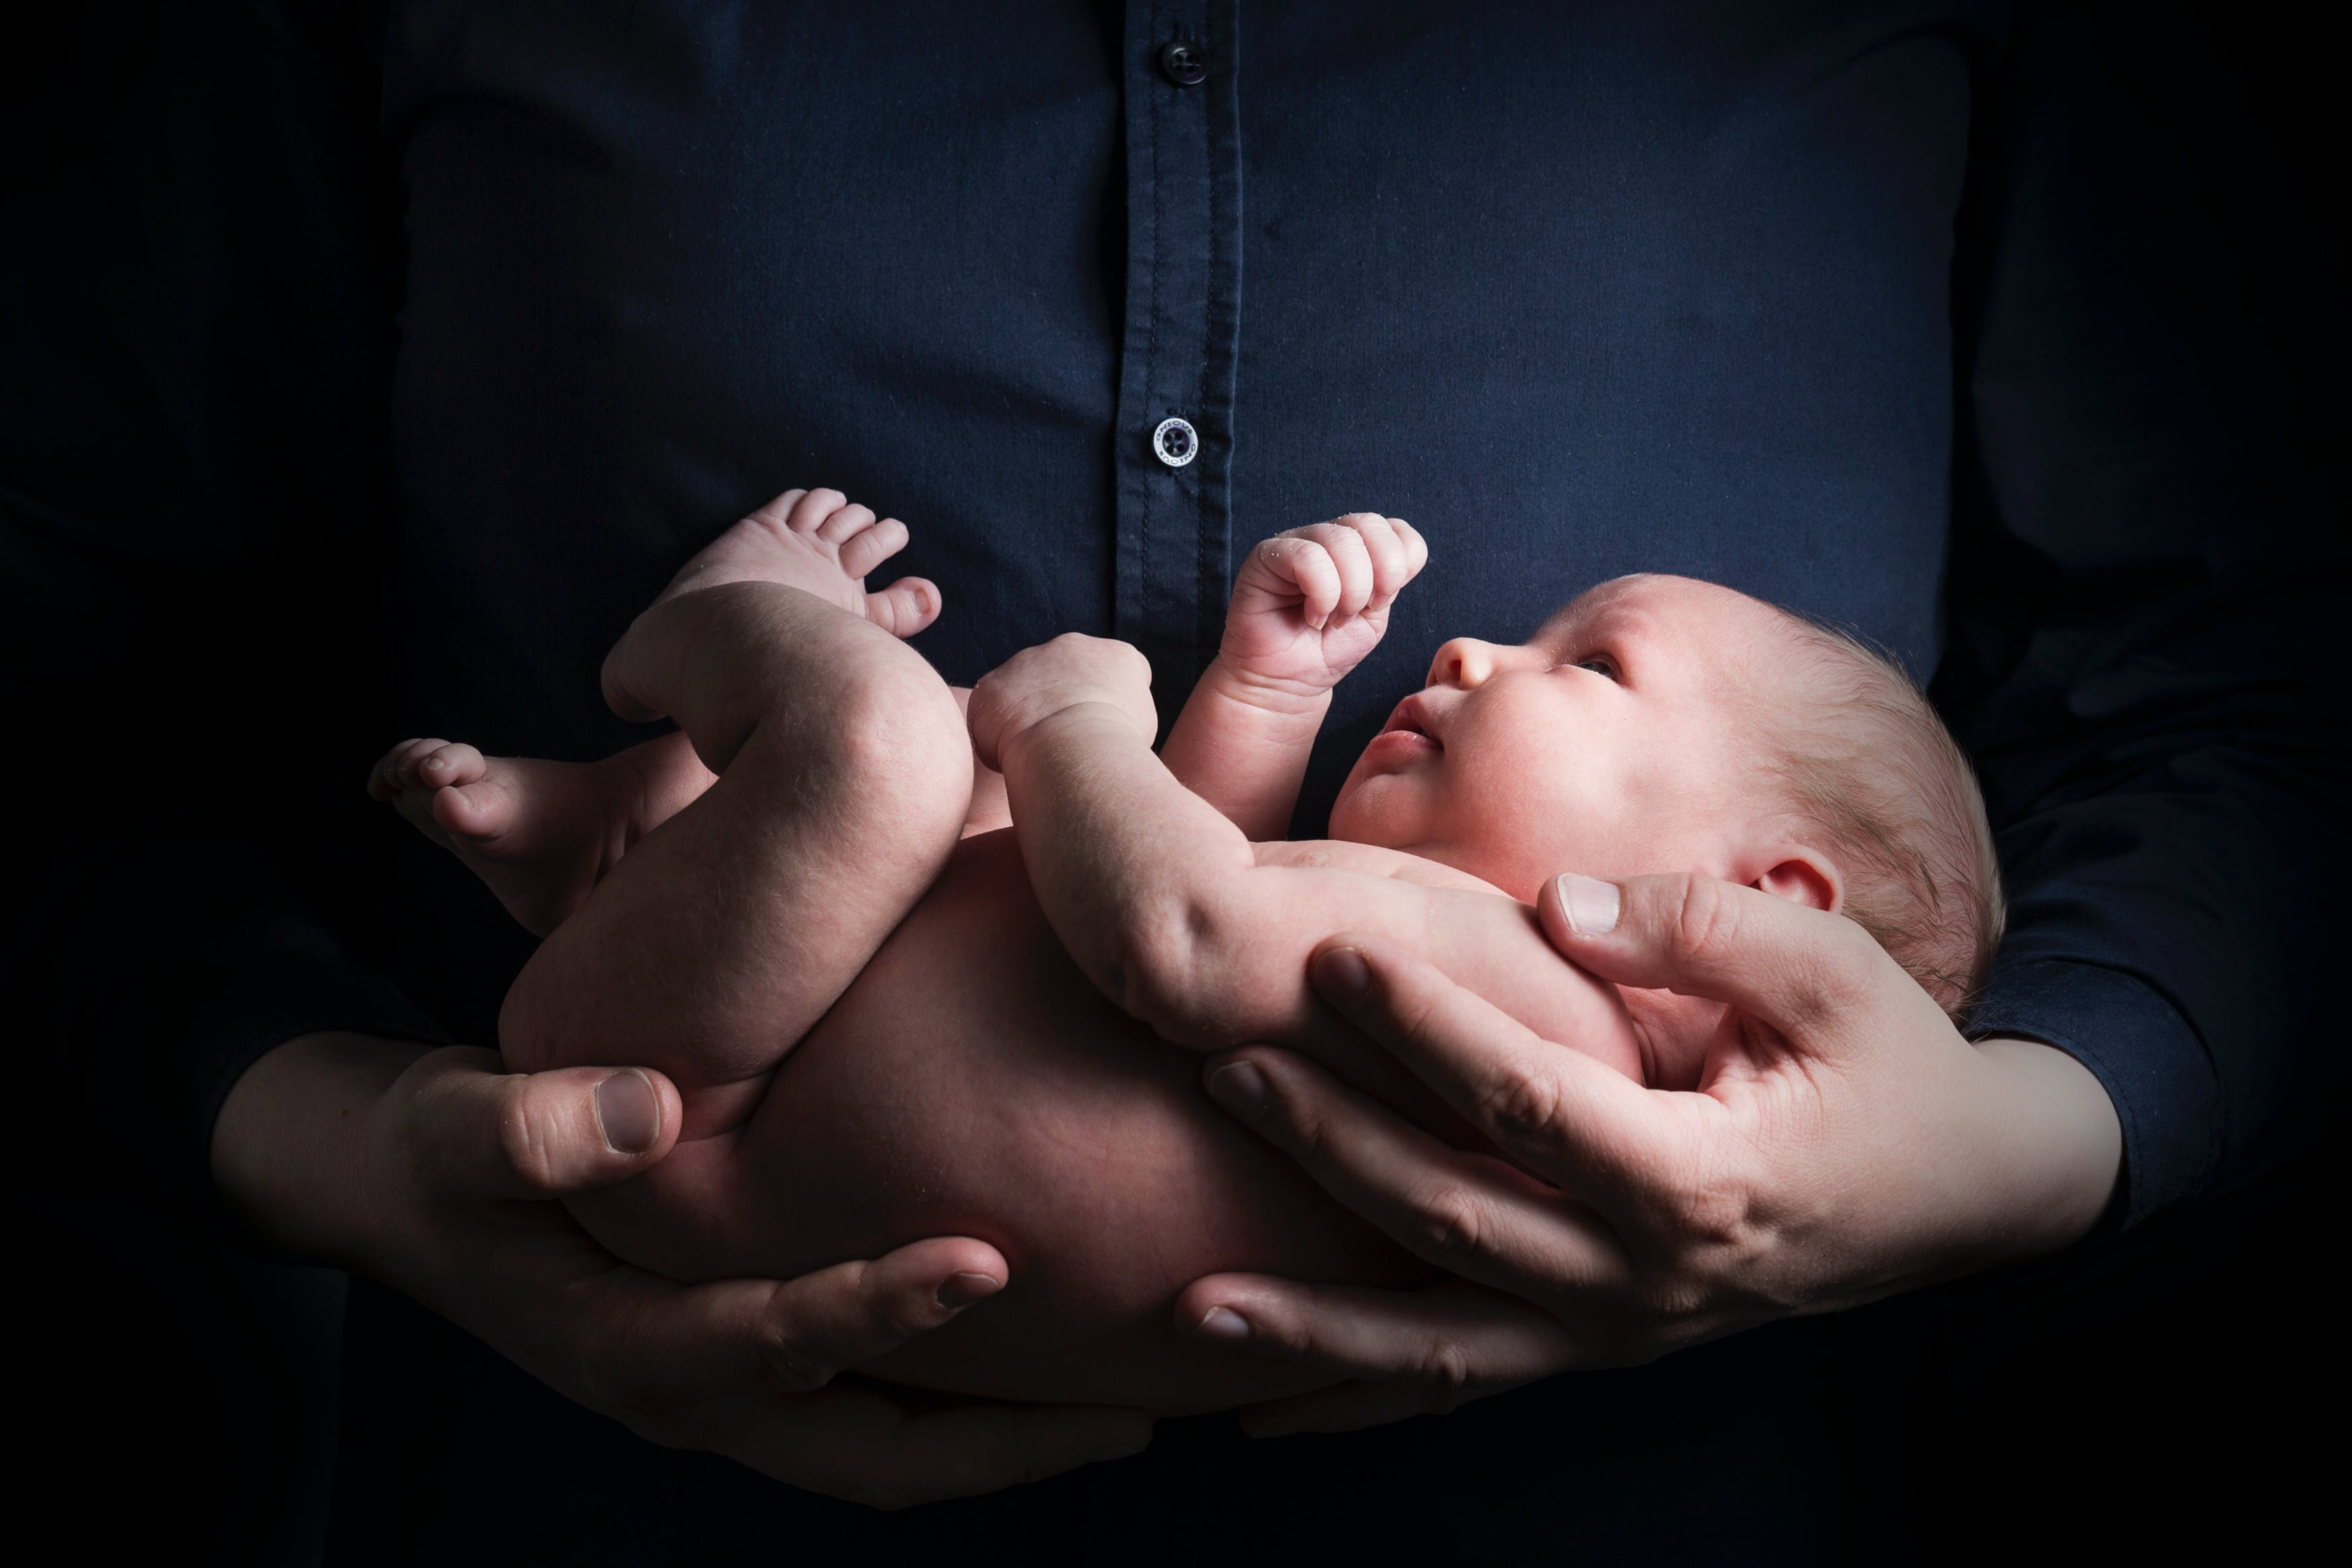 Photo by Rene Asmussen: https://www.pexels.com/photo/close-up-photo-of-a-person-carrying-a-baby-2505110/